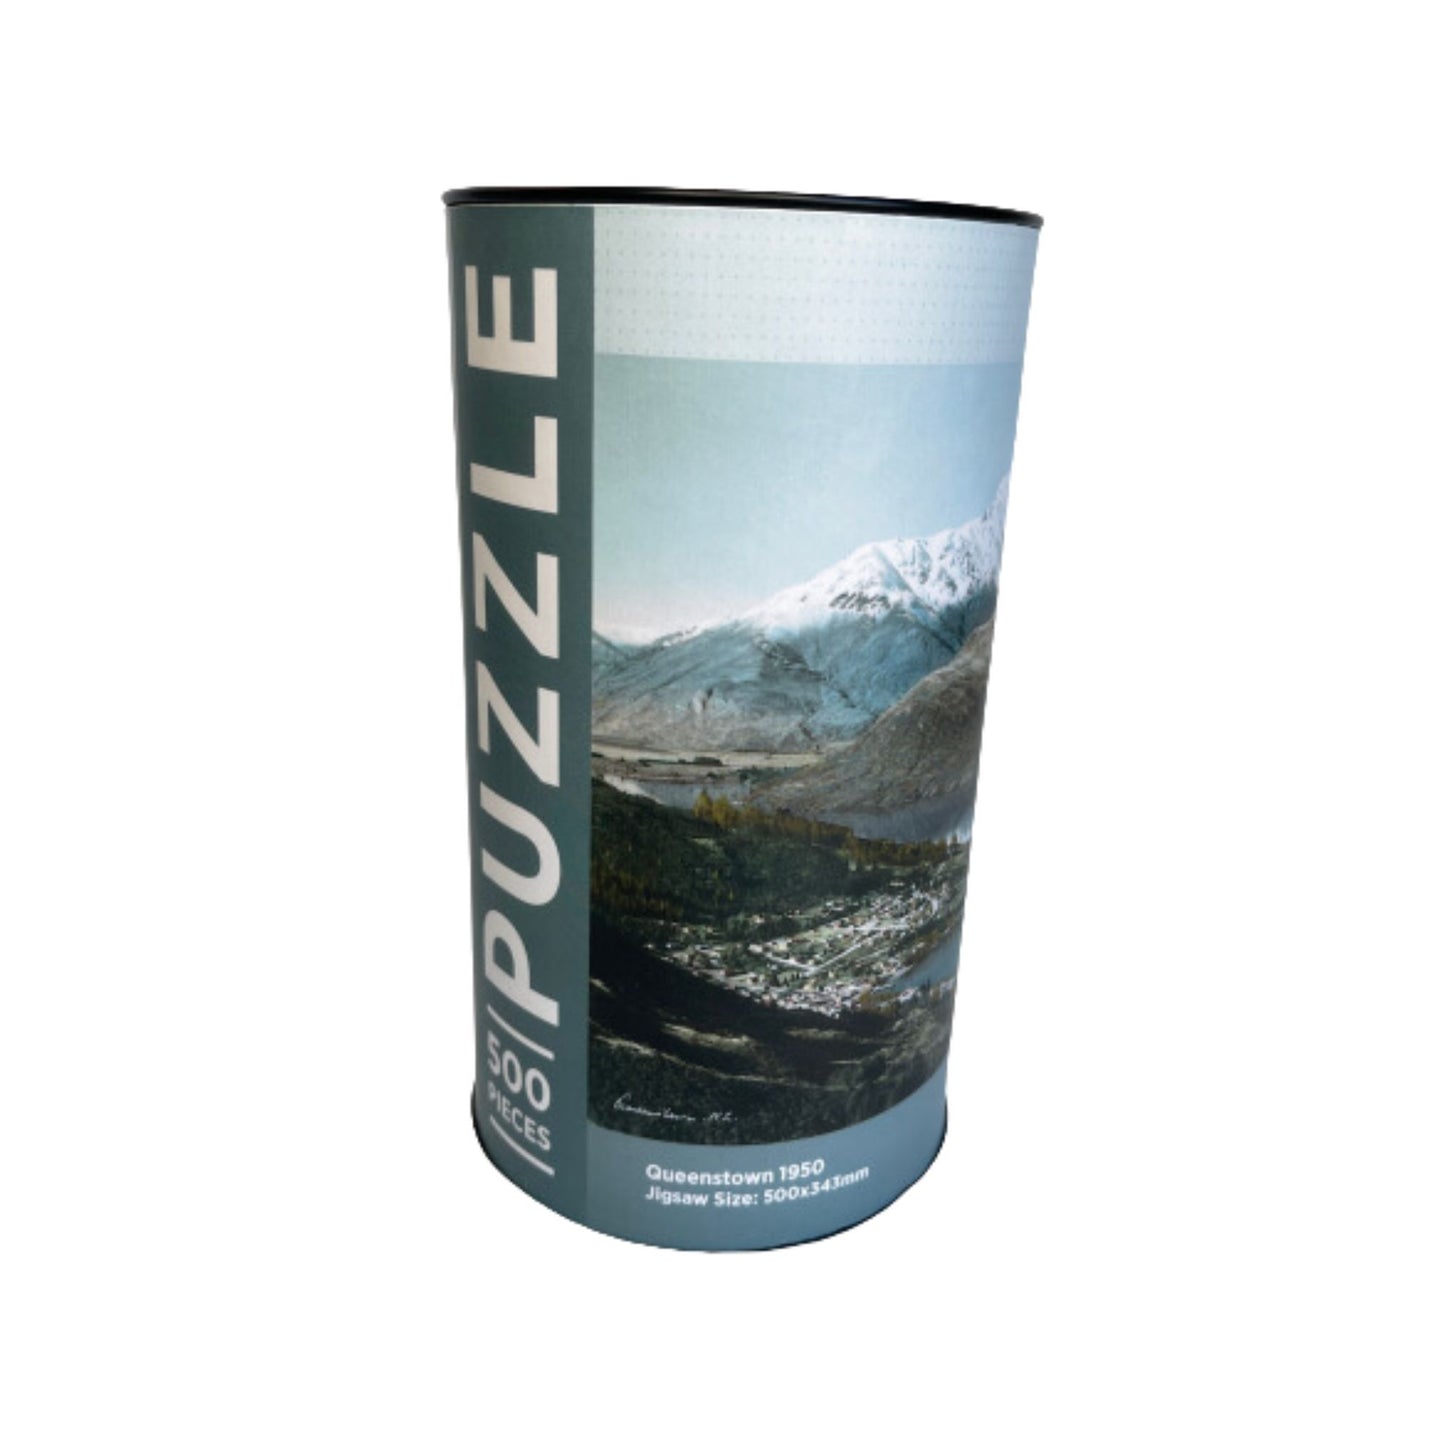 Cardboard tube with a jigsaw puzzle inside featuring artwork of the Queenstown.